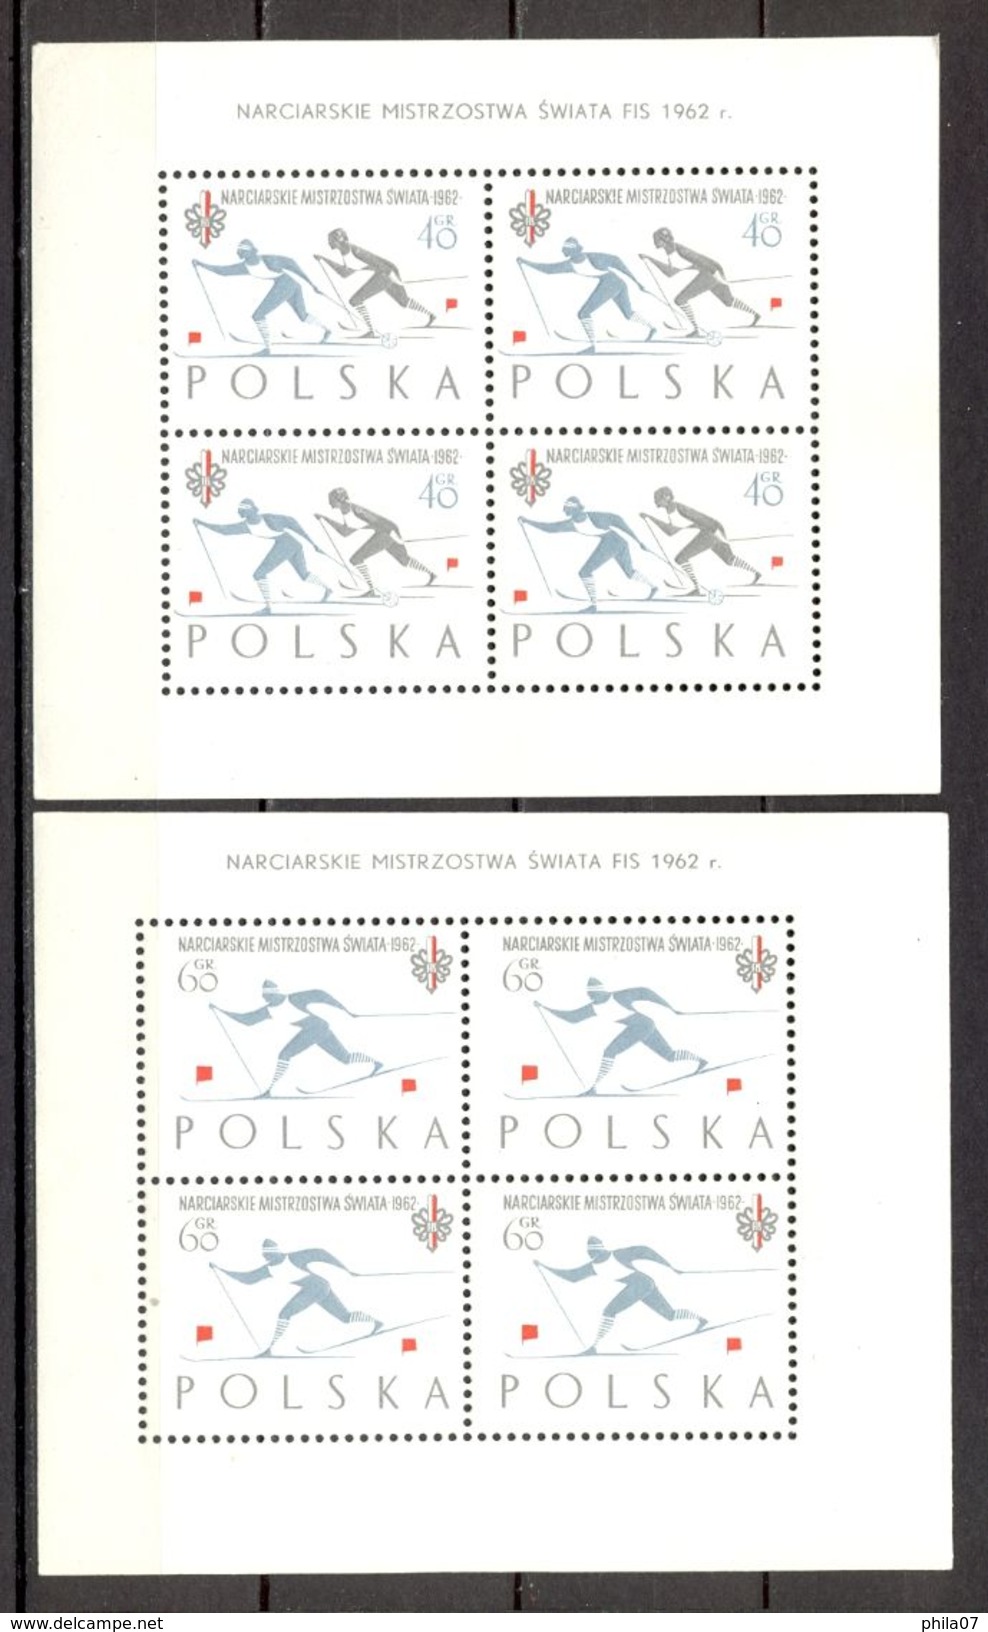 Poland - 1962, SWIATA FIS, Two Blocks, Sheet And Series, All MNH. / See Scans, 5 Scans - Nuovi